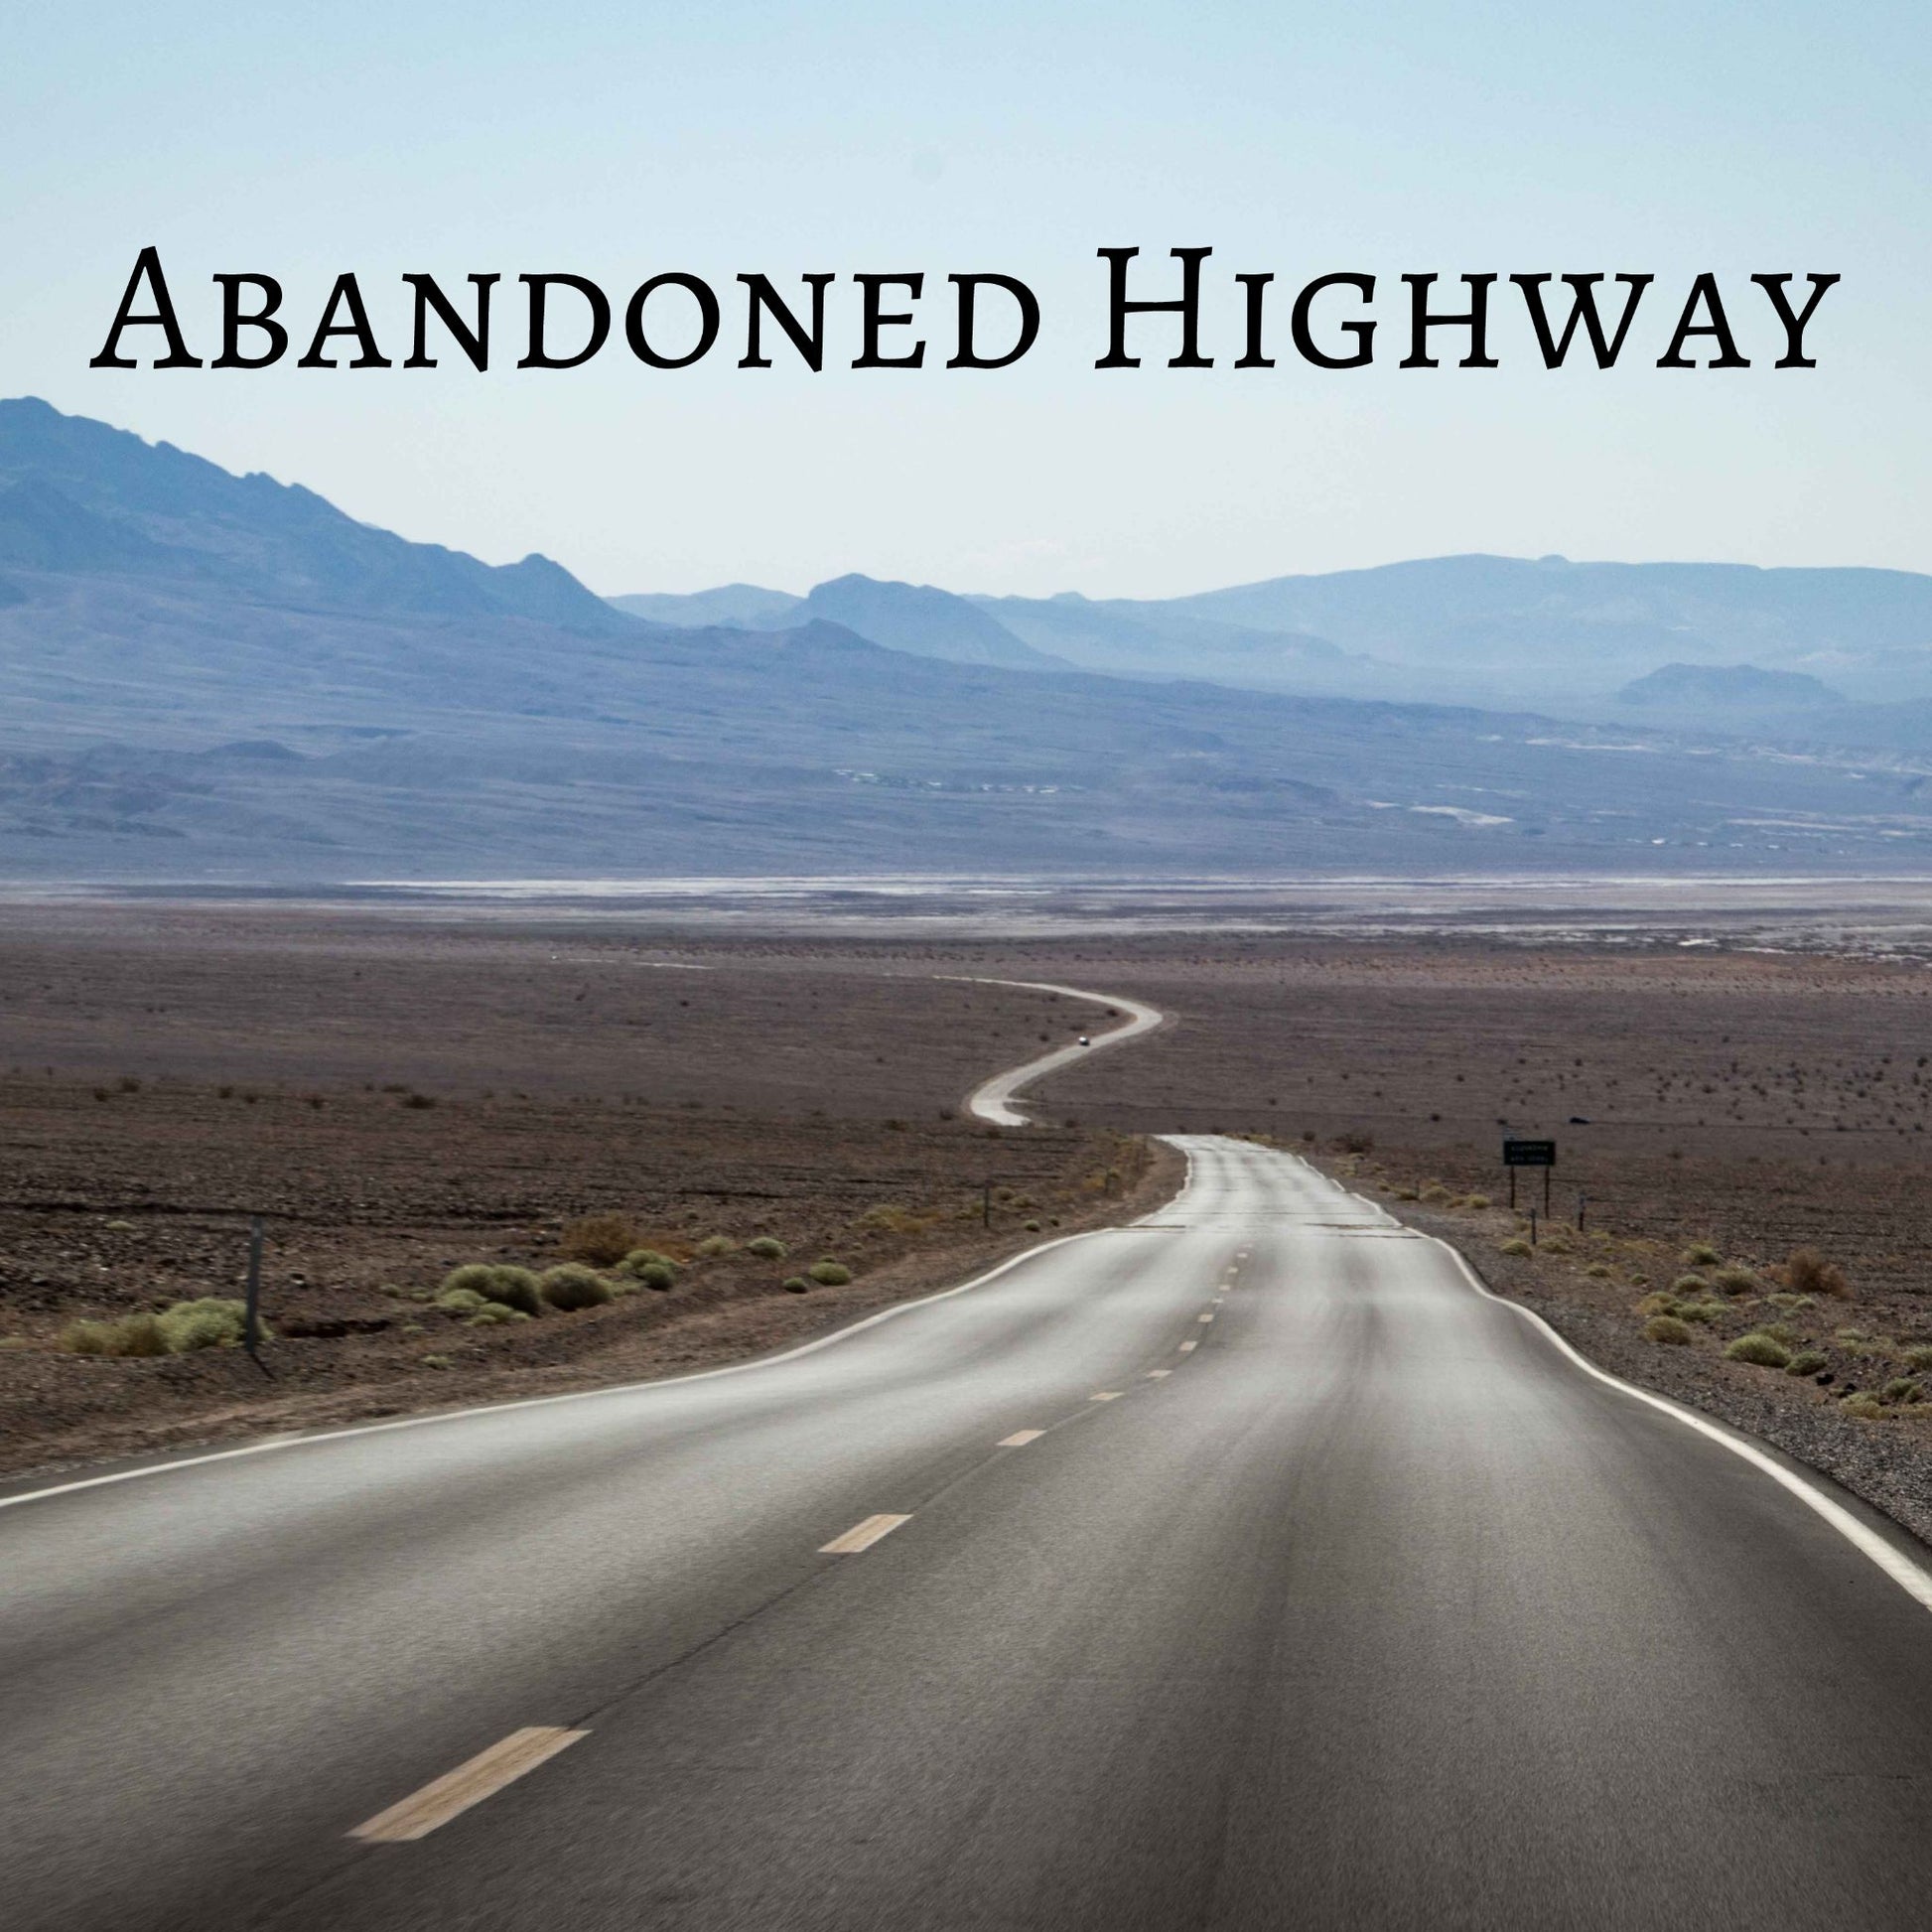 CD Cover of song Abandoned Highway